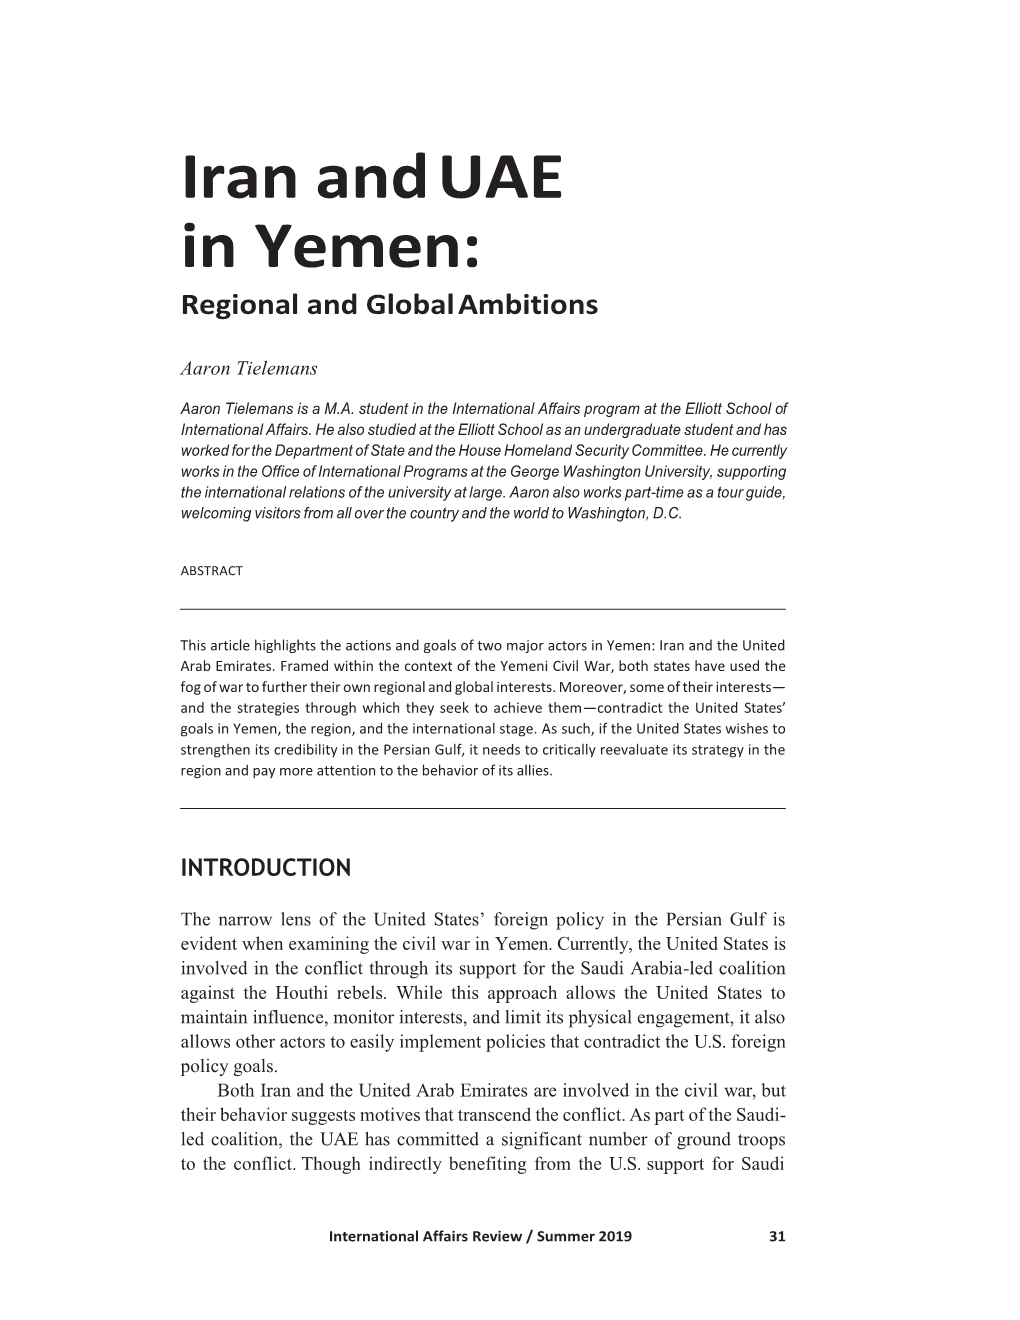 Iran and UAE in Yemen: Regional and Global Ambitions